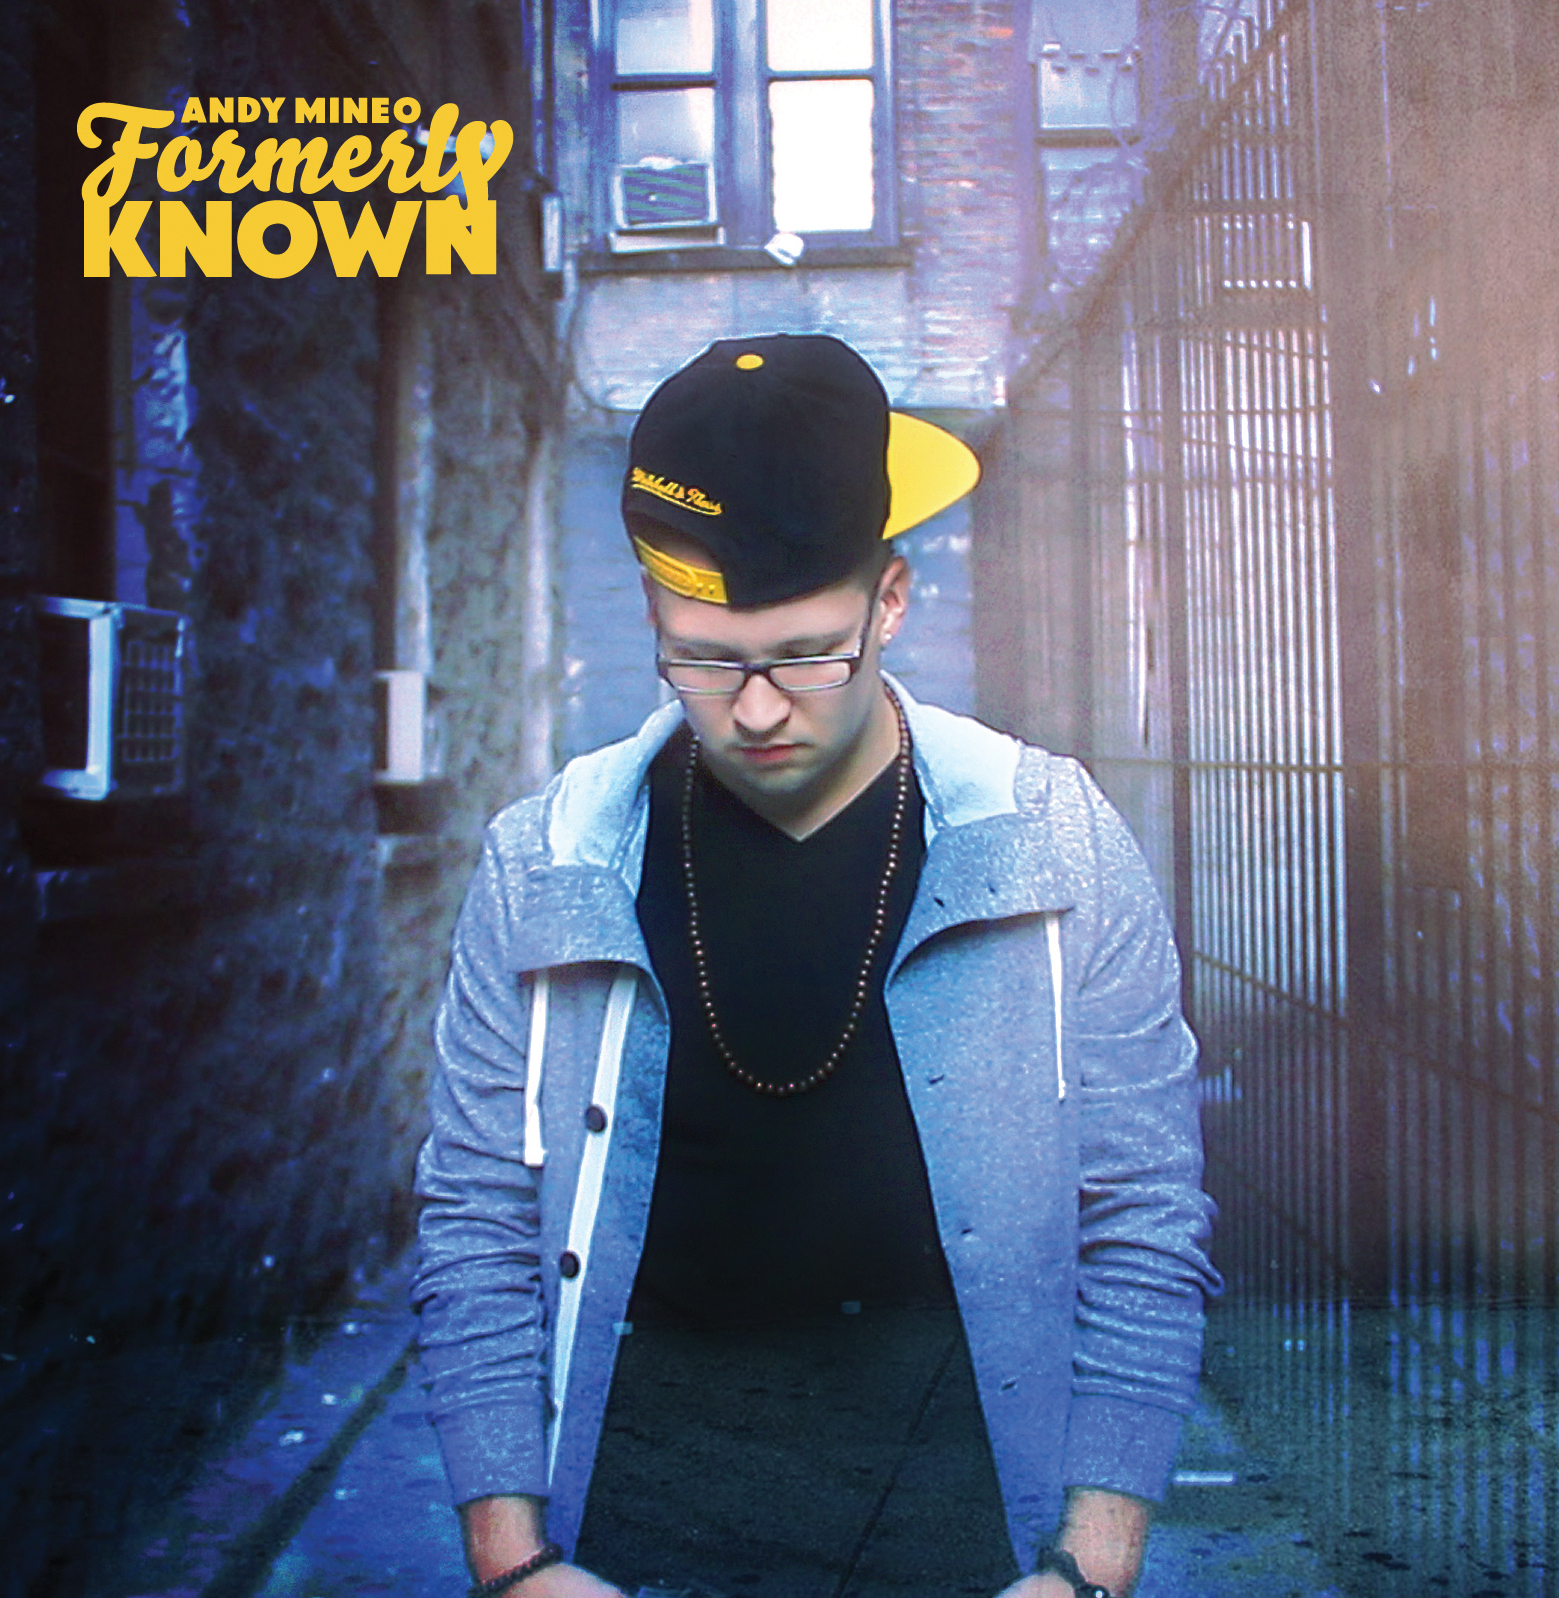 Andy Mineo – Formerly Known now on iTunes!